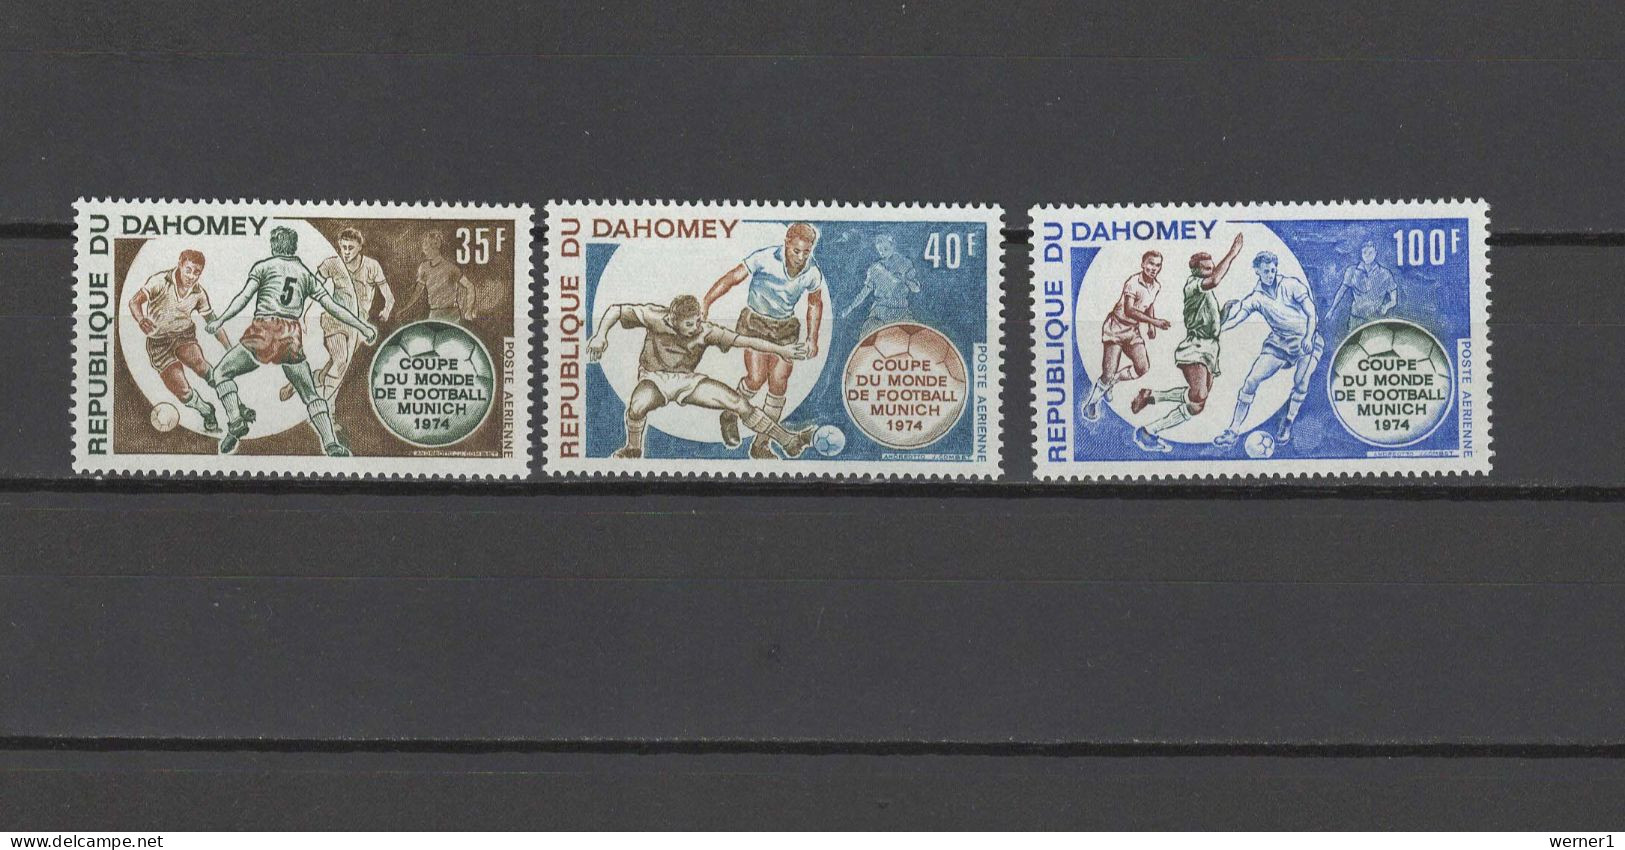 Dahomey 1973 Football Soccer World Cup Set Of 3 MNH - 1974 – West Germany